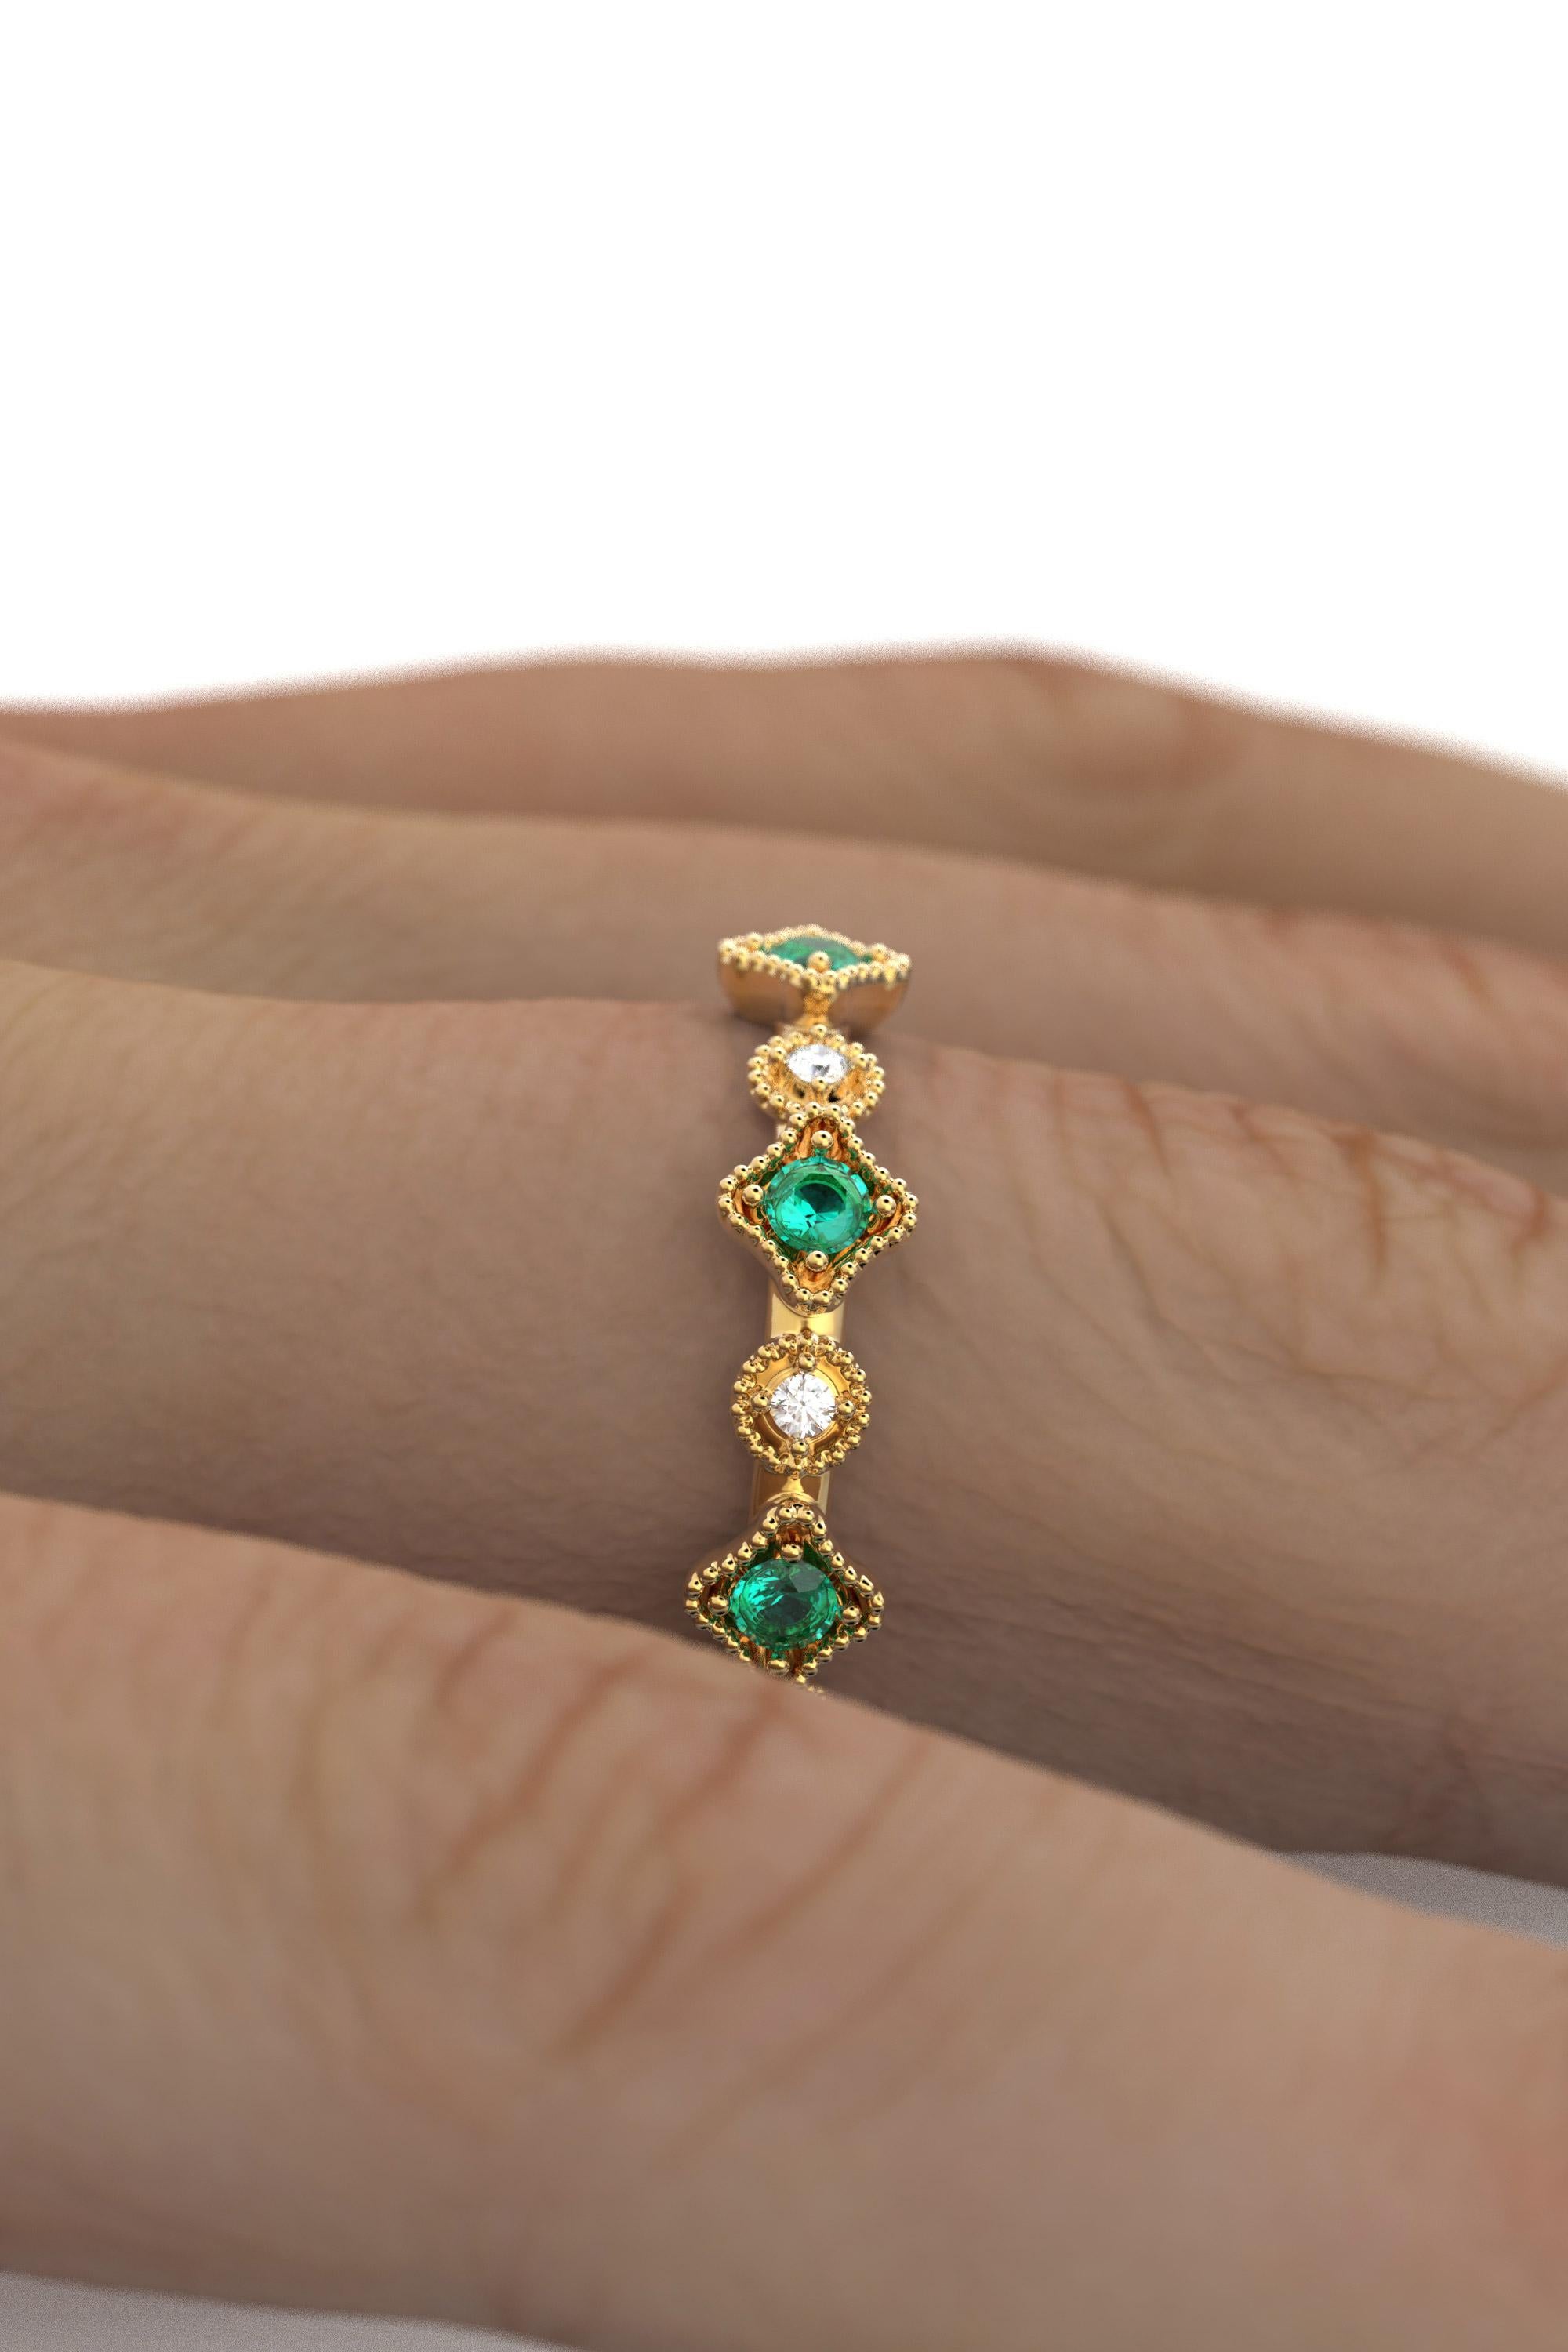 For Sale:  18k Gold Eternity Band with Natural Emerald and Diamonds, Made in Italy Jewelry 6